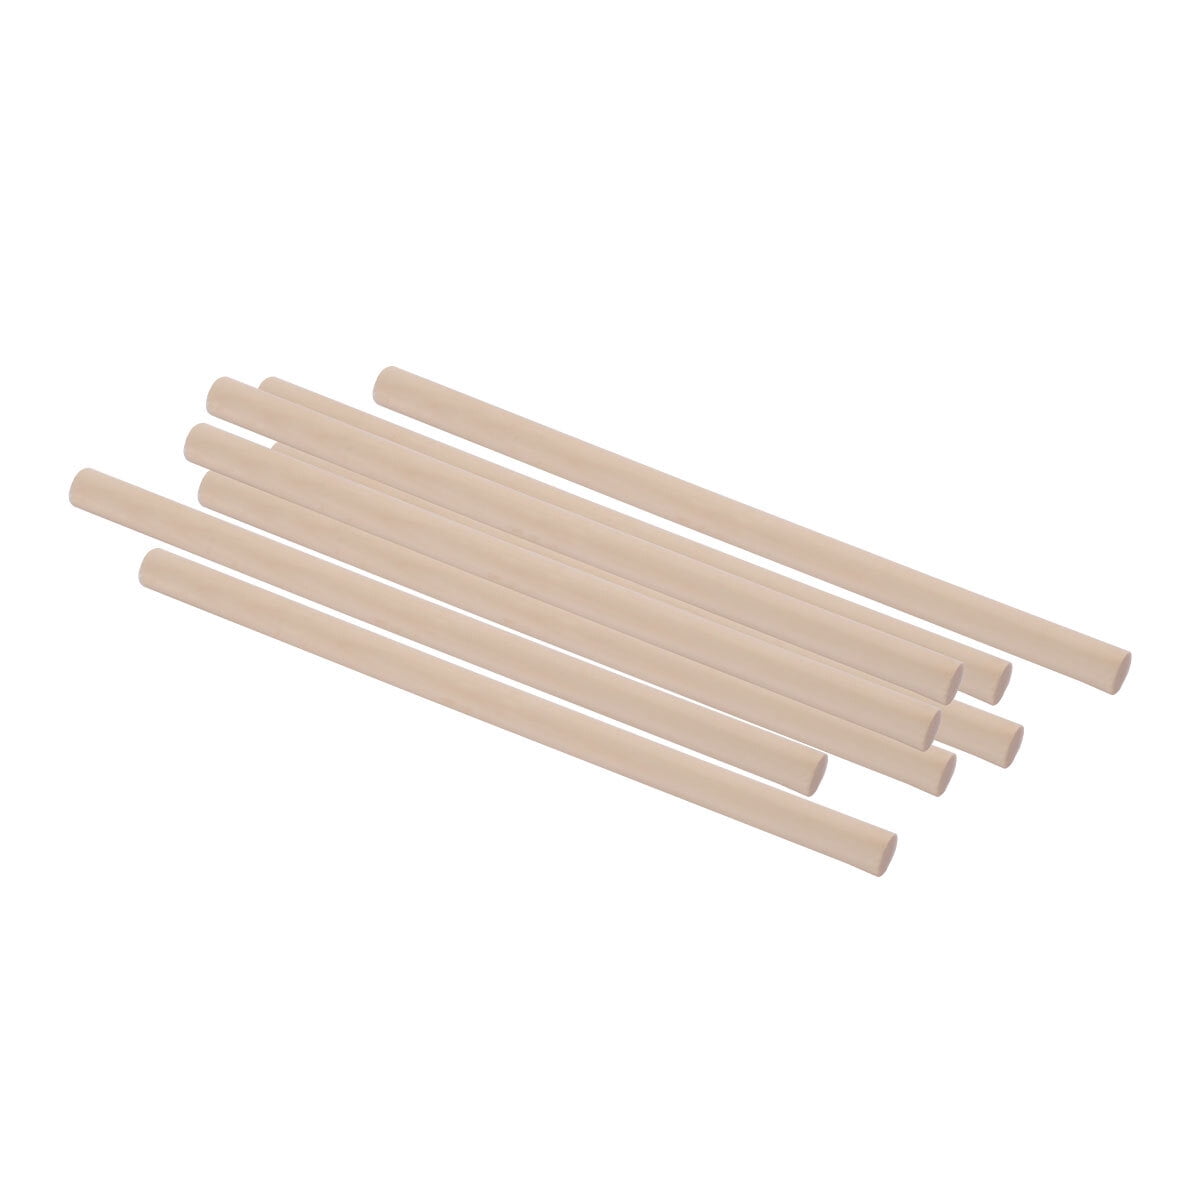 10 each of 4 colours-Buy 2 sets,get 1 free 40 x COLOURED Wooden DOWEL RODS 